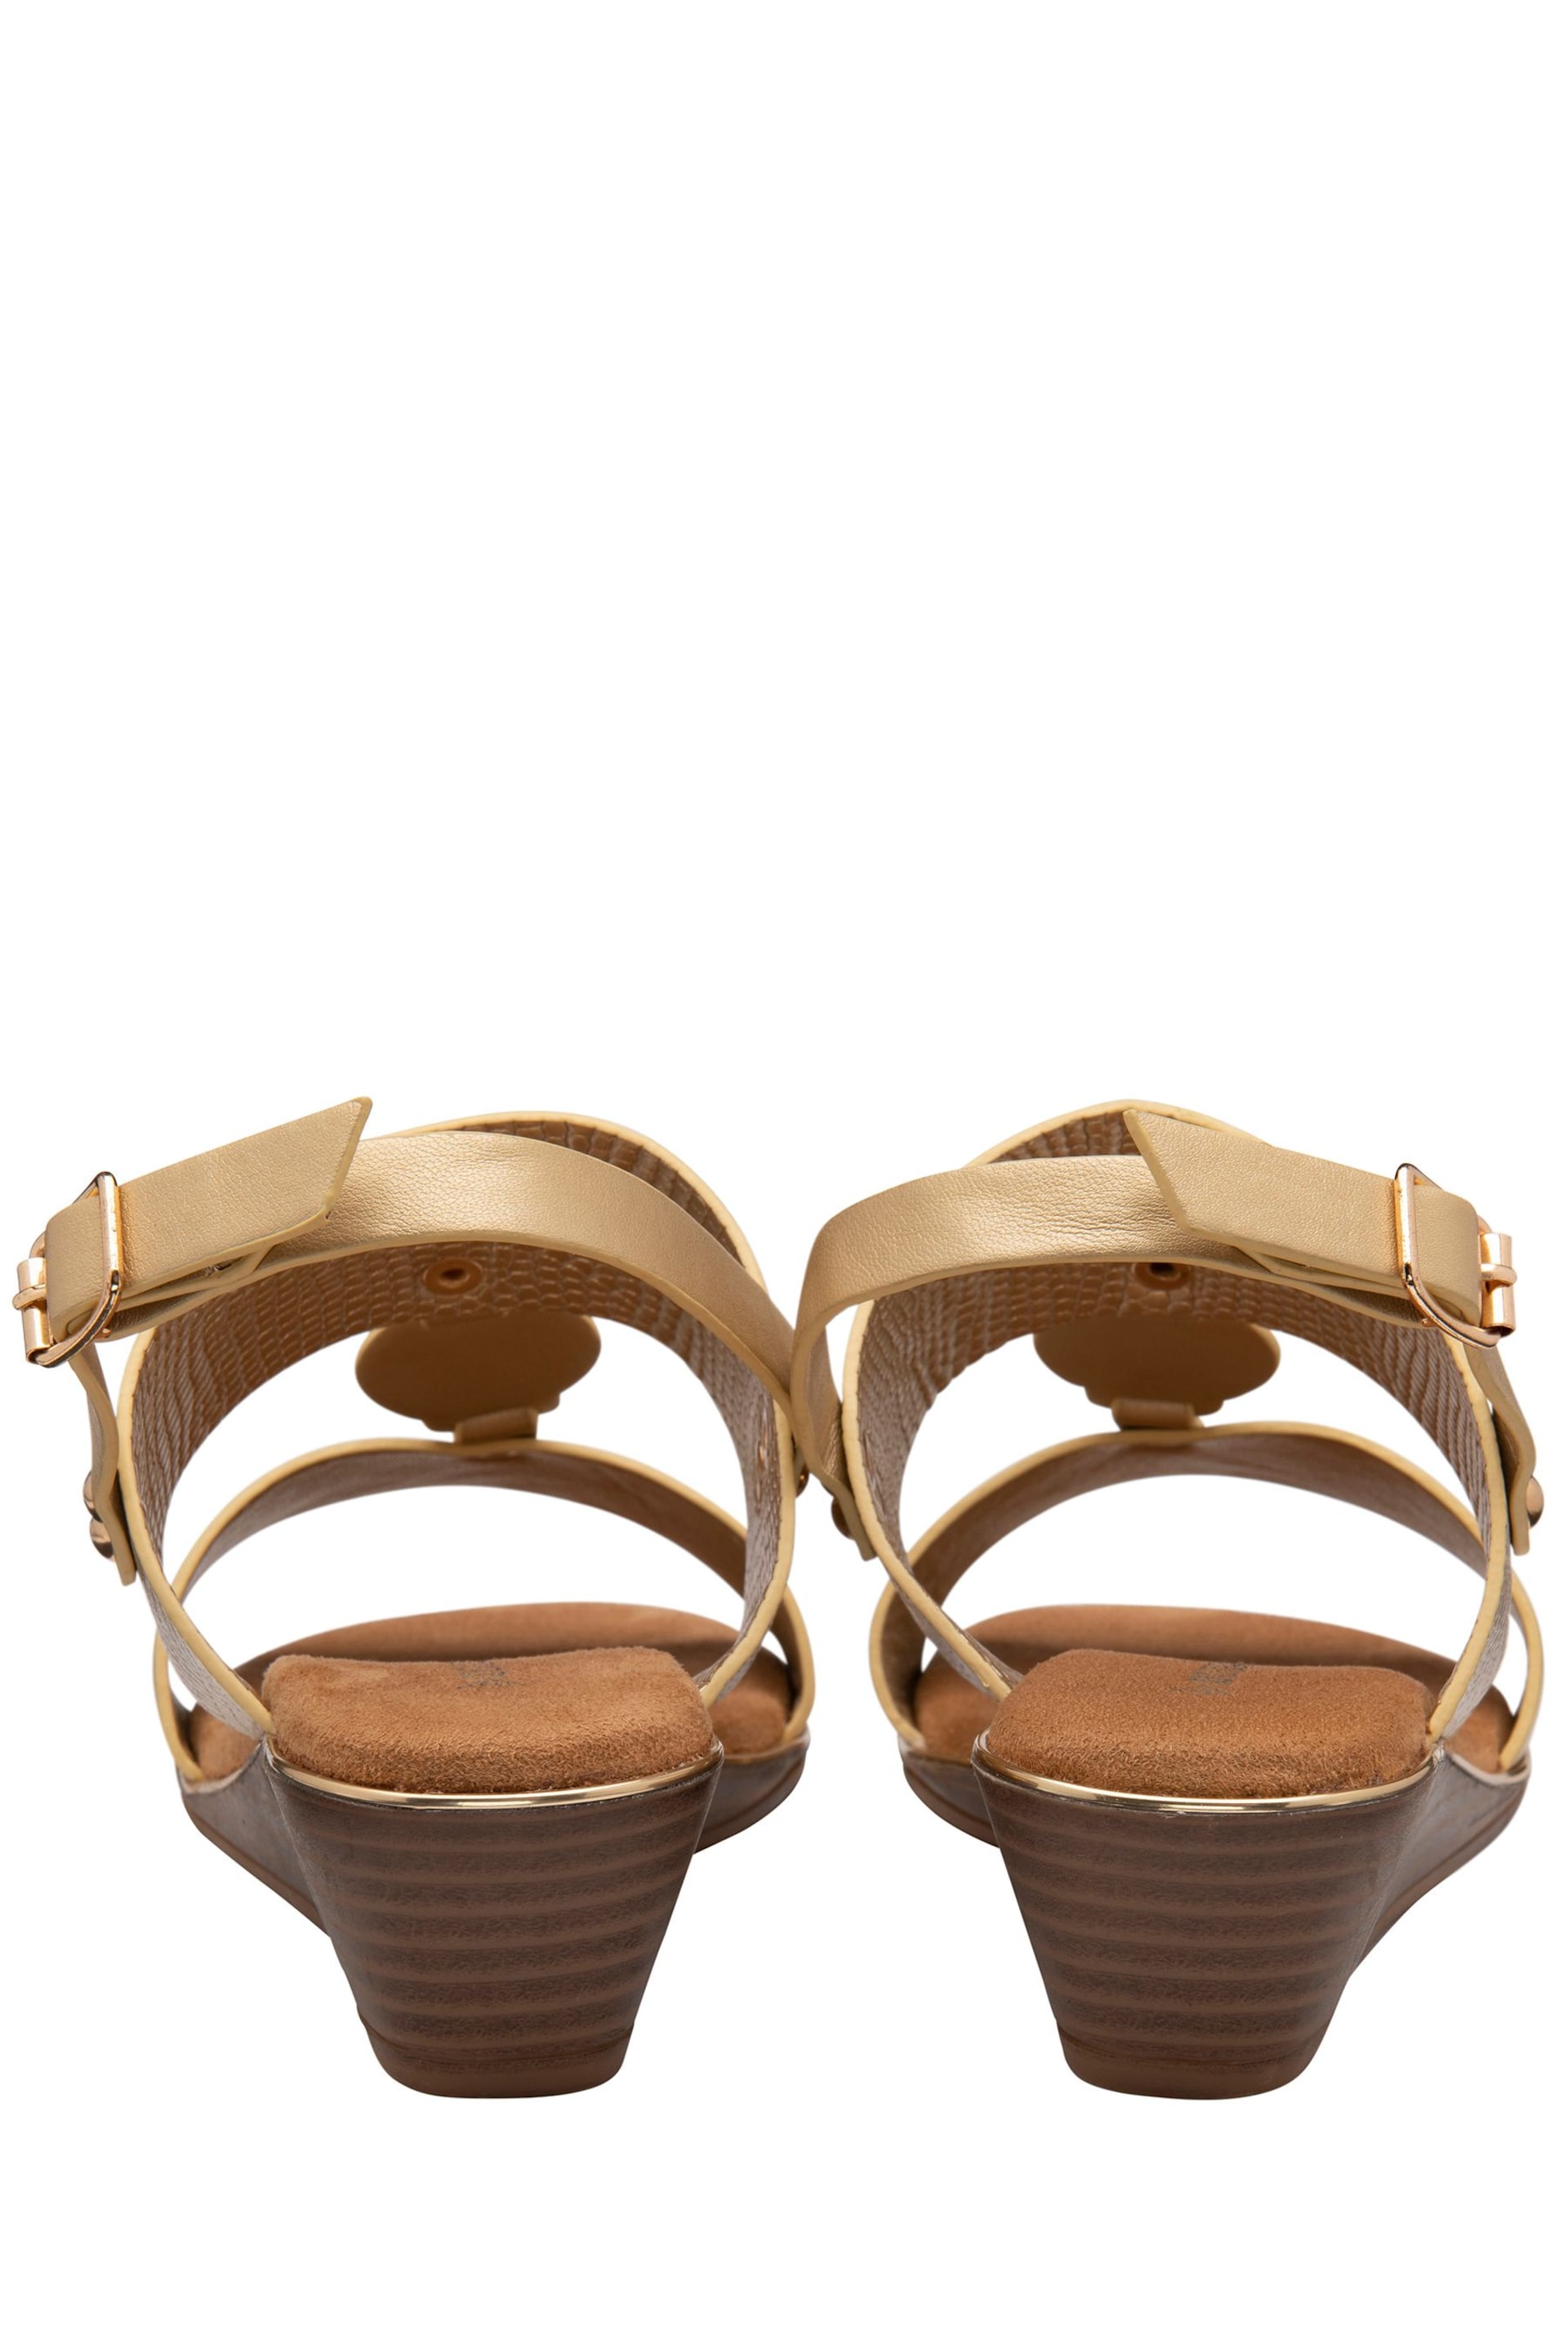 Dunlop Gold Wedge Open-Toe Sandals - Image 3 of 4